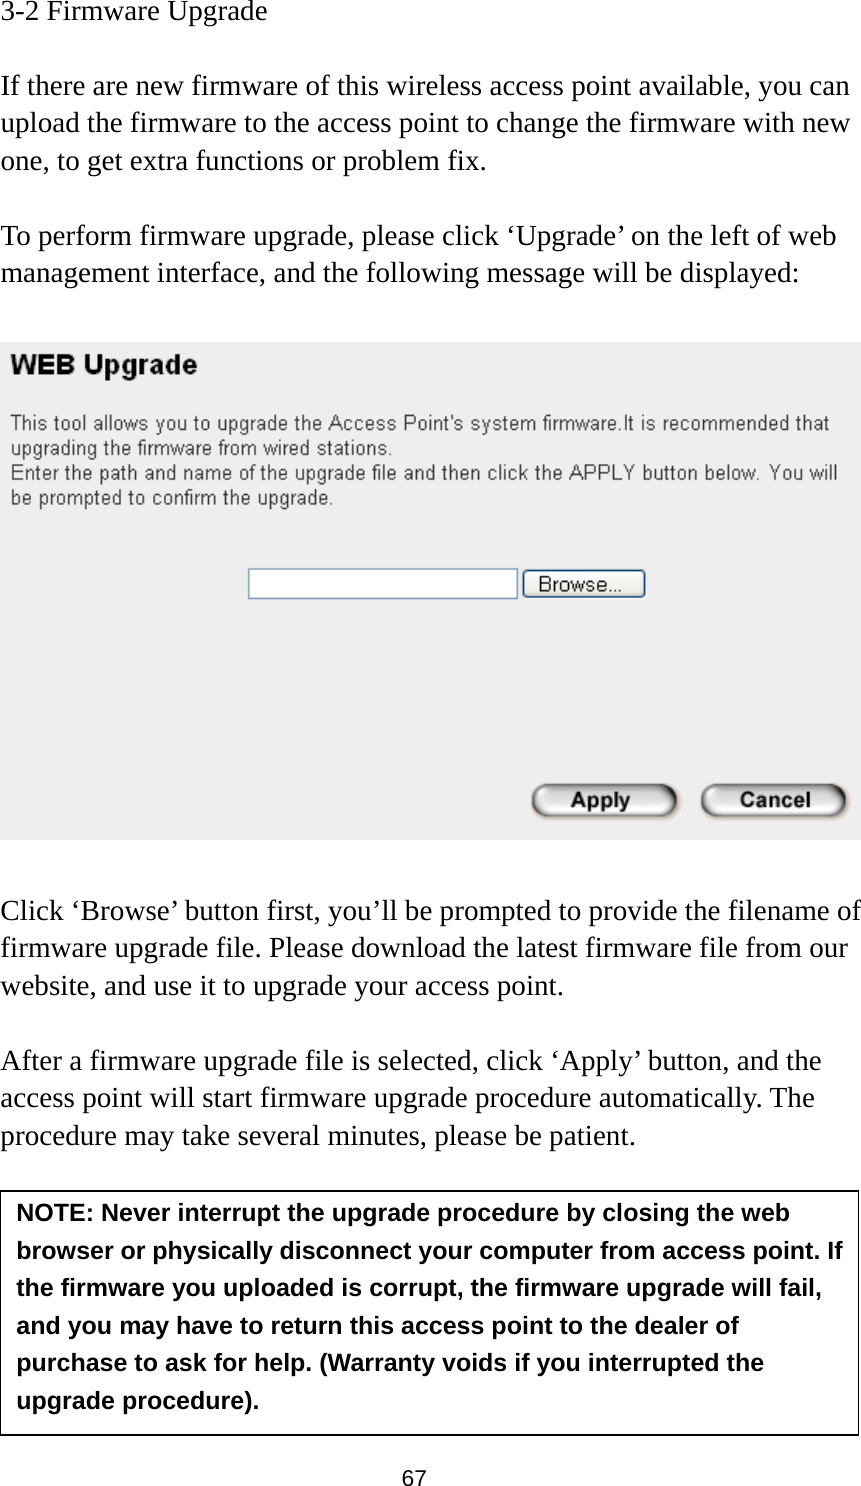  67 3-2 Firmware Upgrade  If there are new firmware of this wireless access point available, you can upload the firmware to the access point to change the firmware with new one, to get extra functions or problem fix.  To perform firmware upgrade, please click ‘Upgrade’ on the left of web management interface, and the following message will be displayed:    Click ‘Browse’ button first, you’ll be prompted to provide the filename of firmware upgrade file. Please download the latest firmware file from our website, and use it to upgrade your access point.    After a firmware upgrade file is selected, click ‘Apply’ button, and the access point will start firmware upgrade procedure automatically. The procedure may take several minutes, please be patient.   NOTE: Never interrupt the upgrade procedure by closing the web browser or physically disconnect your computer from access point. If the firmware you uploaded is corrupt, the firmware upgrade will fail, and you may have to return this access point to the dealer of purchase to ask for help. (Warranty voids if you interrupted the upgrade procedure).   